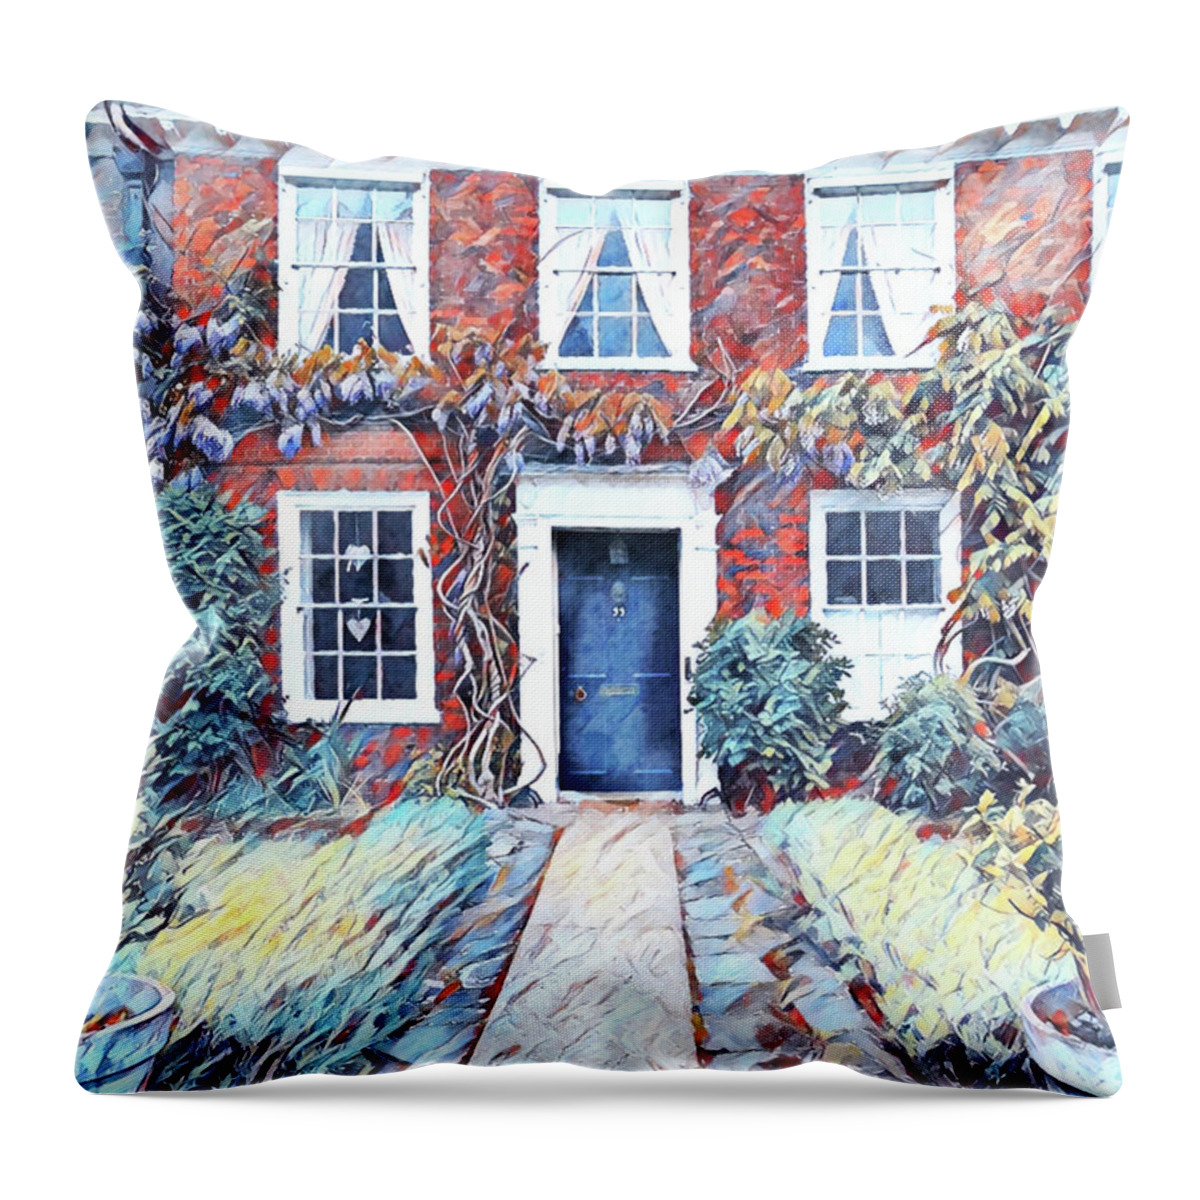 Blue Door Throw Pillow featuring the painting Blue Door by Patricia Piotrak